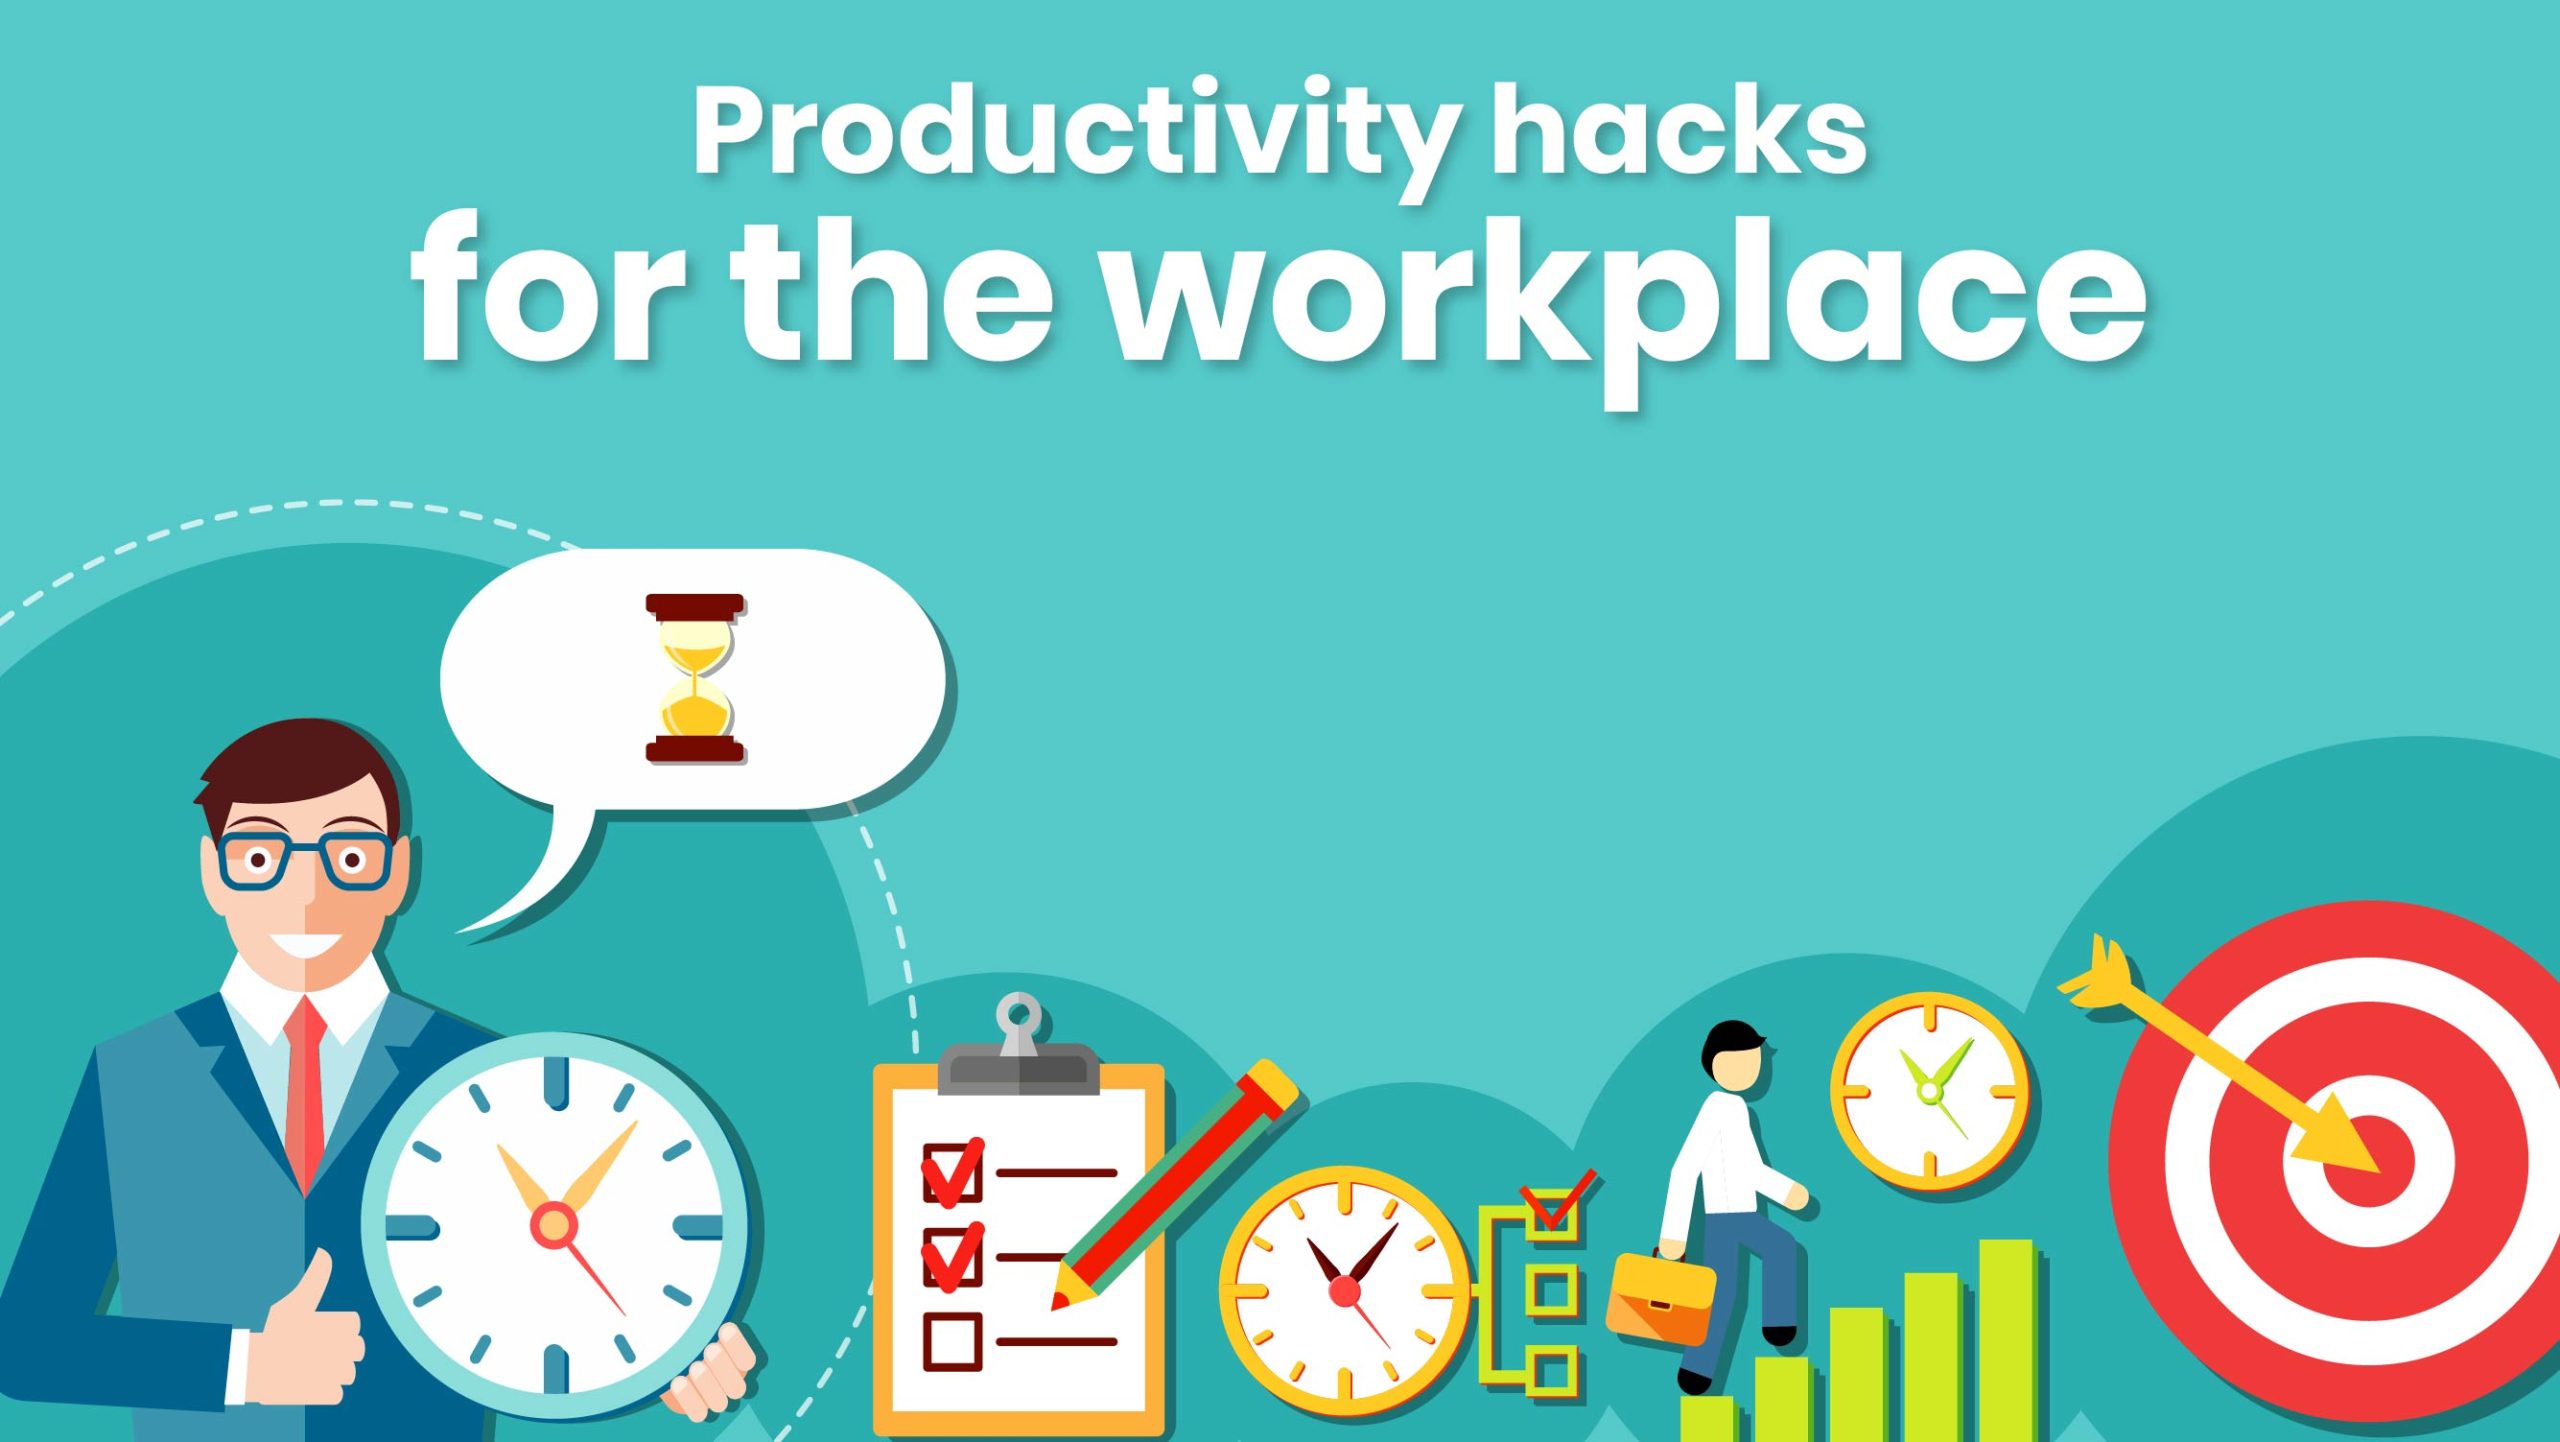 Productivity hacks for the workplace